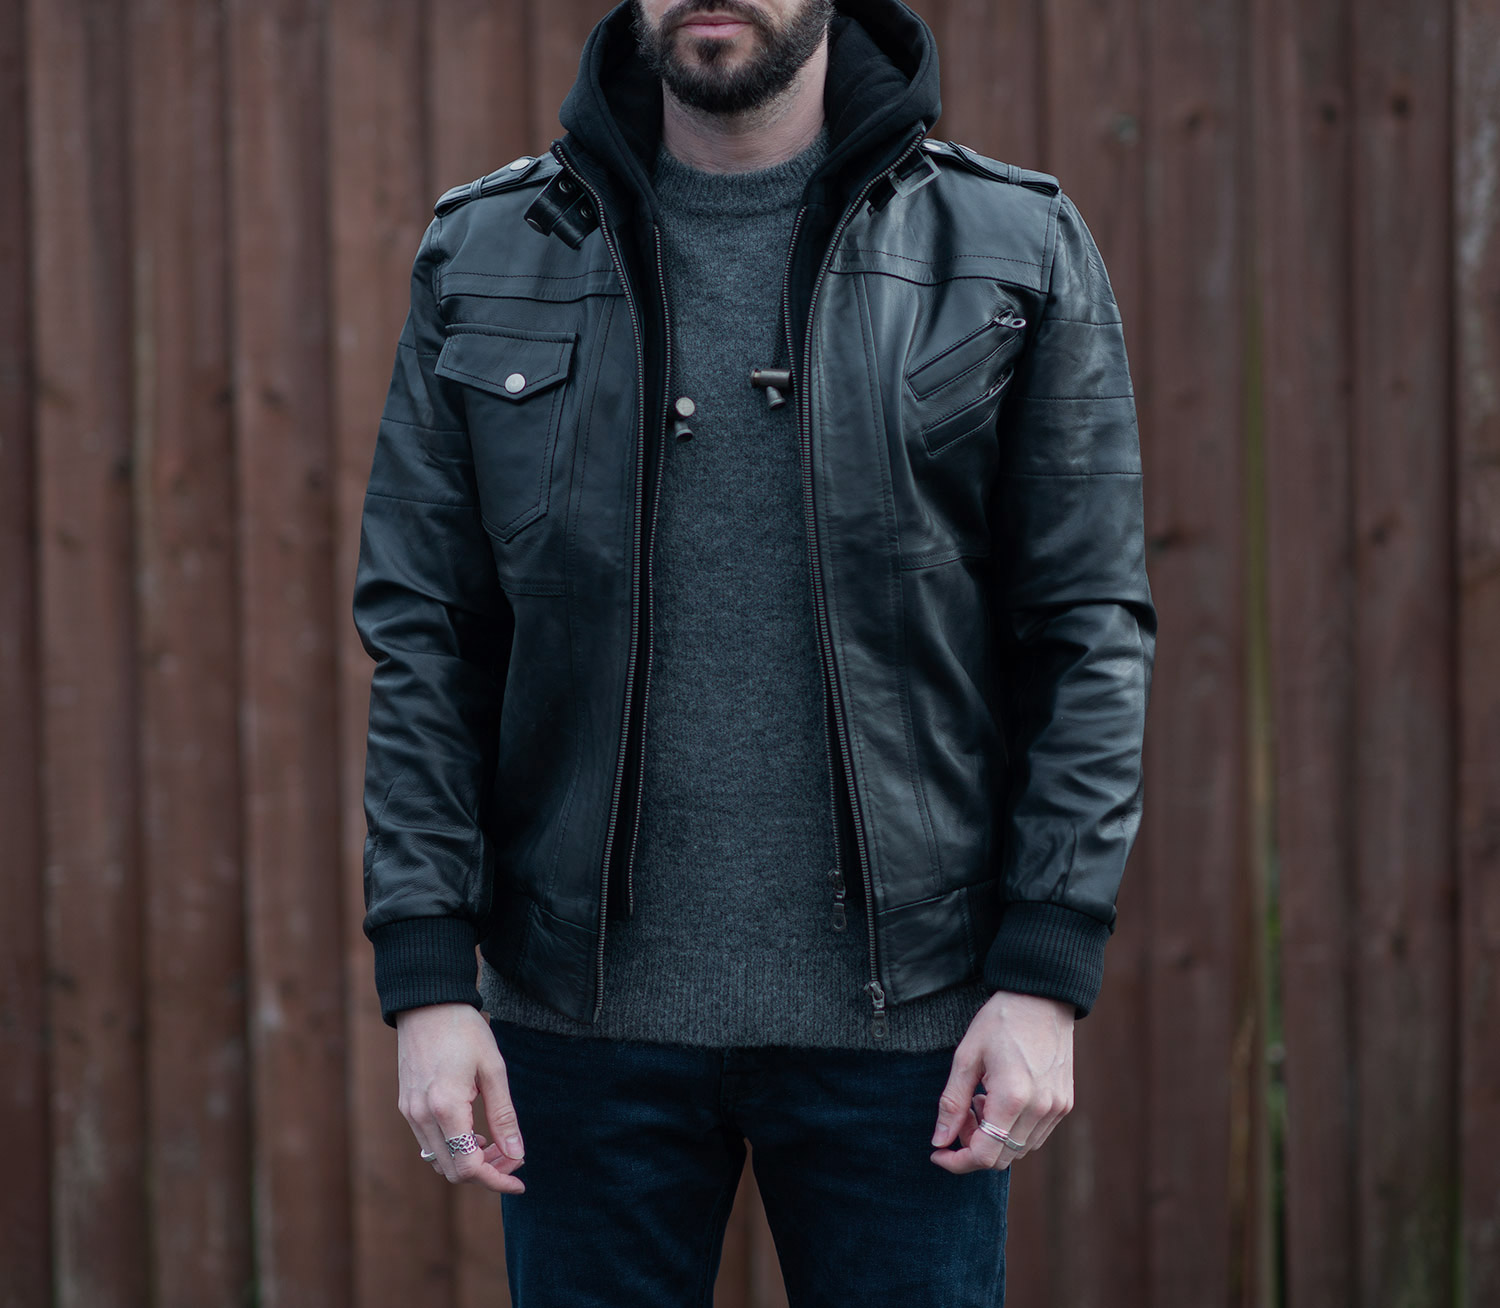 Mens Black Leather Bomber Jacket - Real Leather Jacket with Hood by FJackets